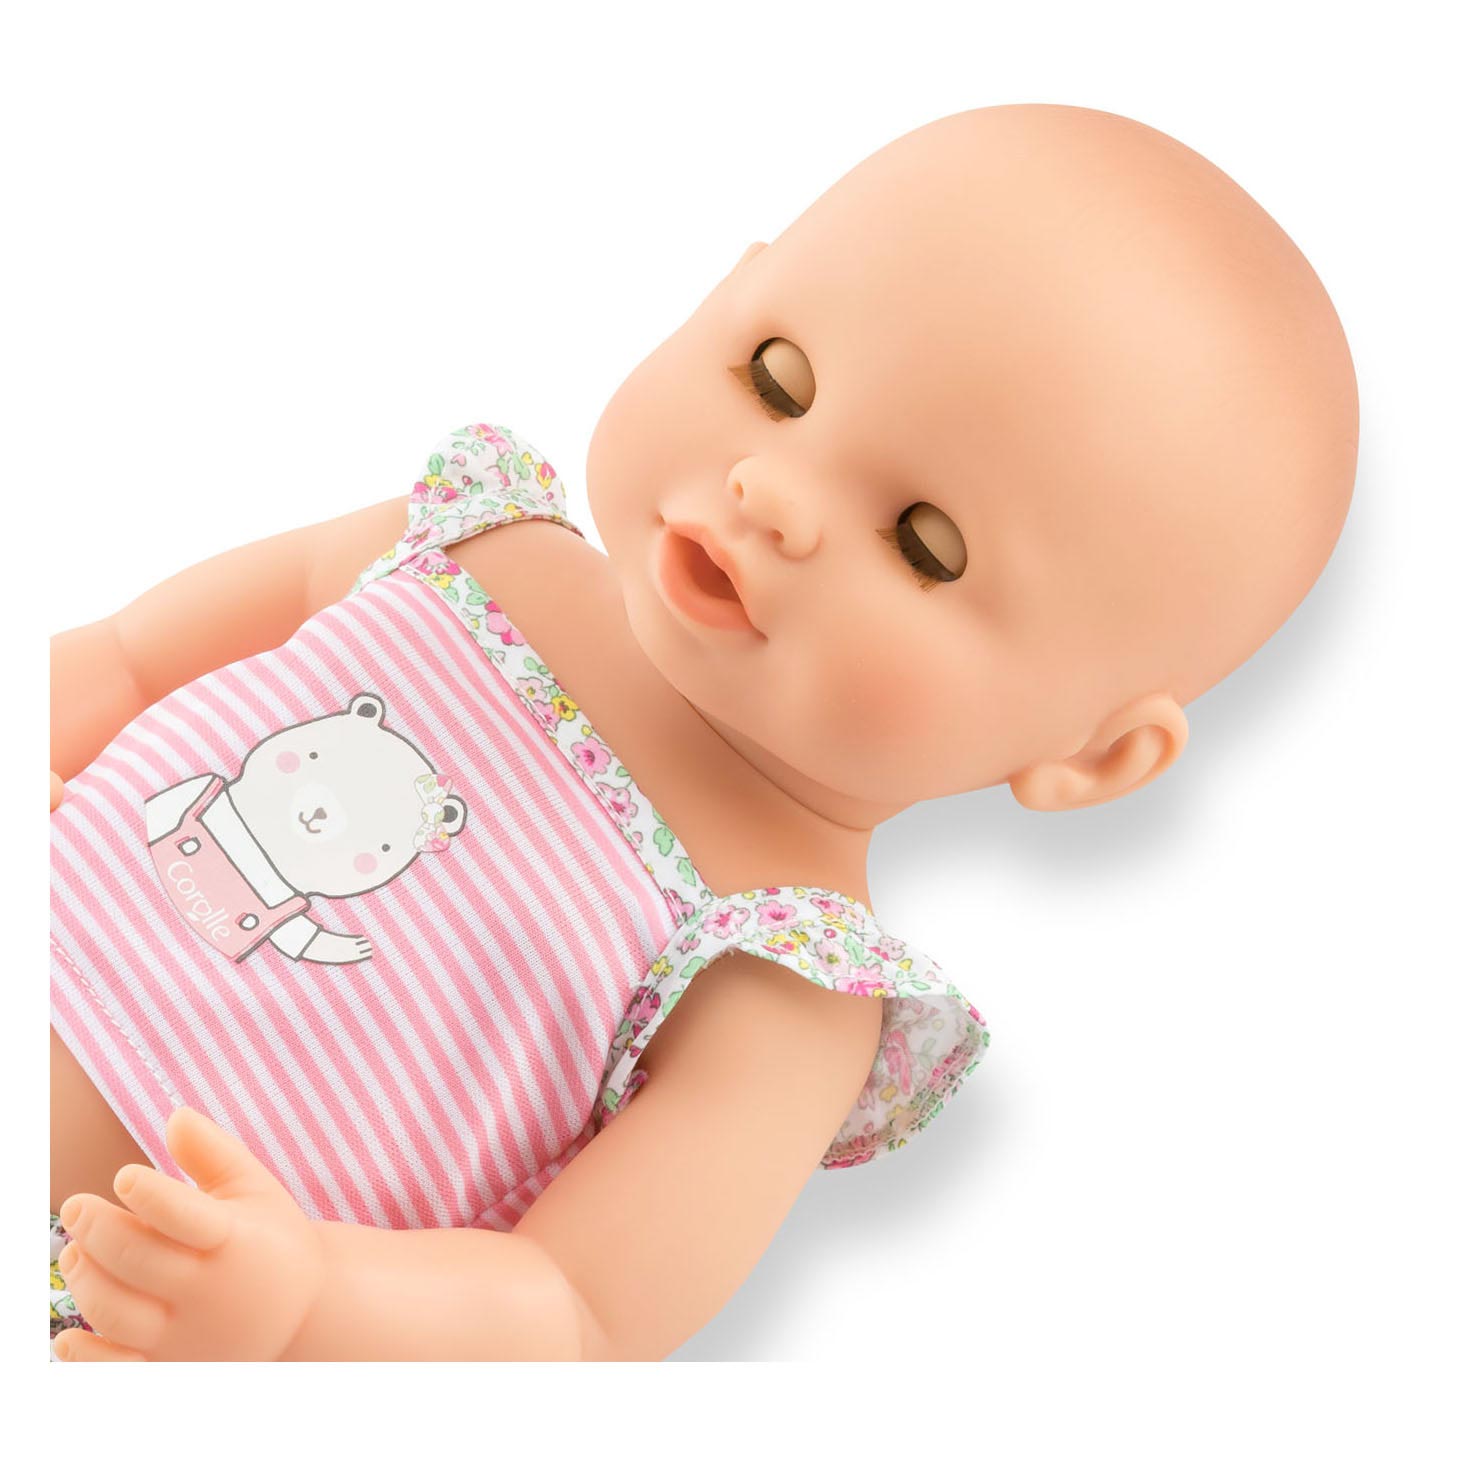 Corolle Mon Grand Poupon Baby Doll - Emelie Thumbs, 36cm